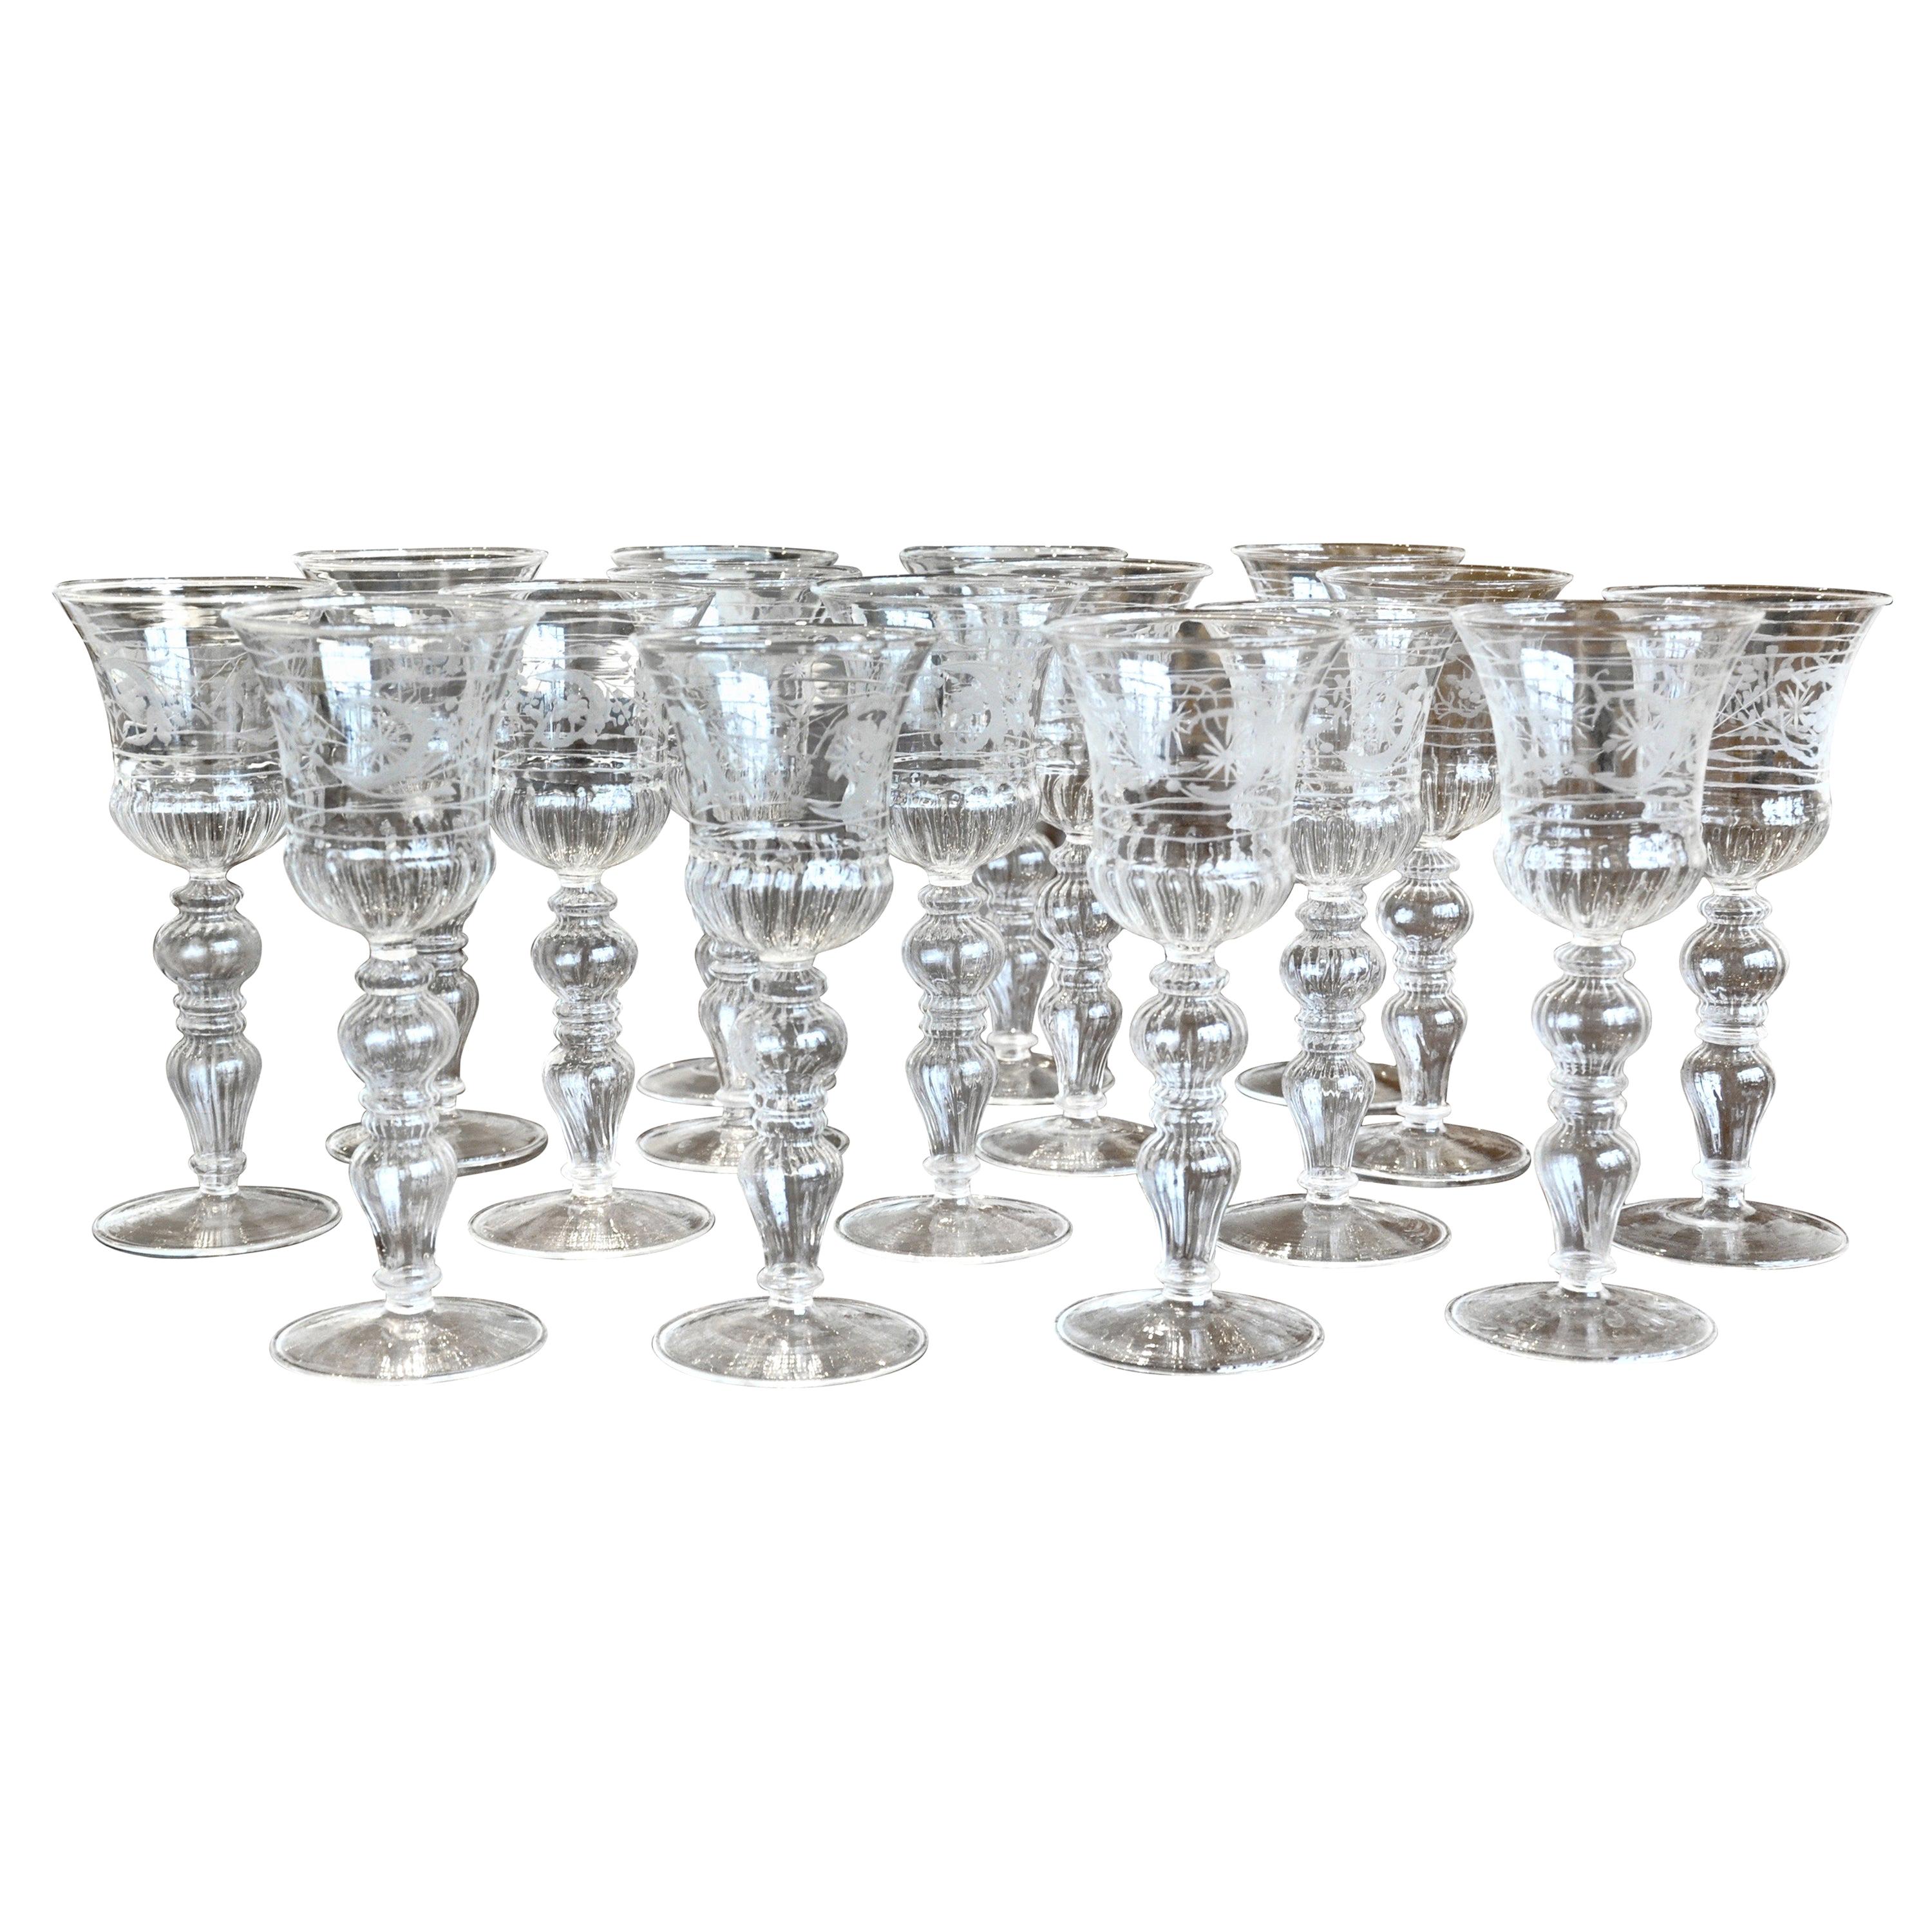 Set of 14 Blown and Etched Venetian Glass Wine Goblets